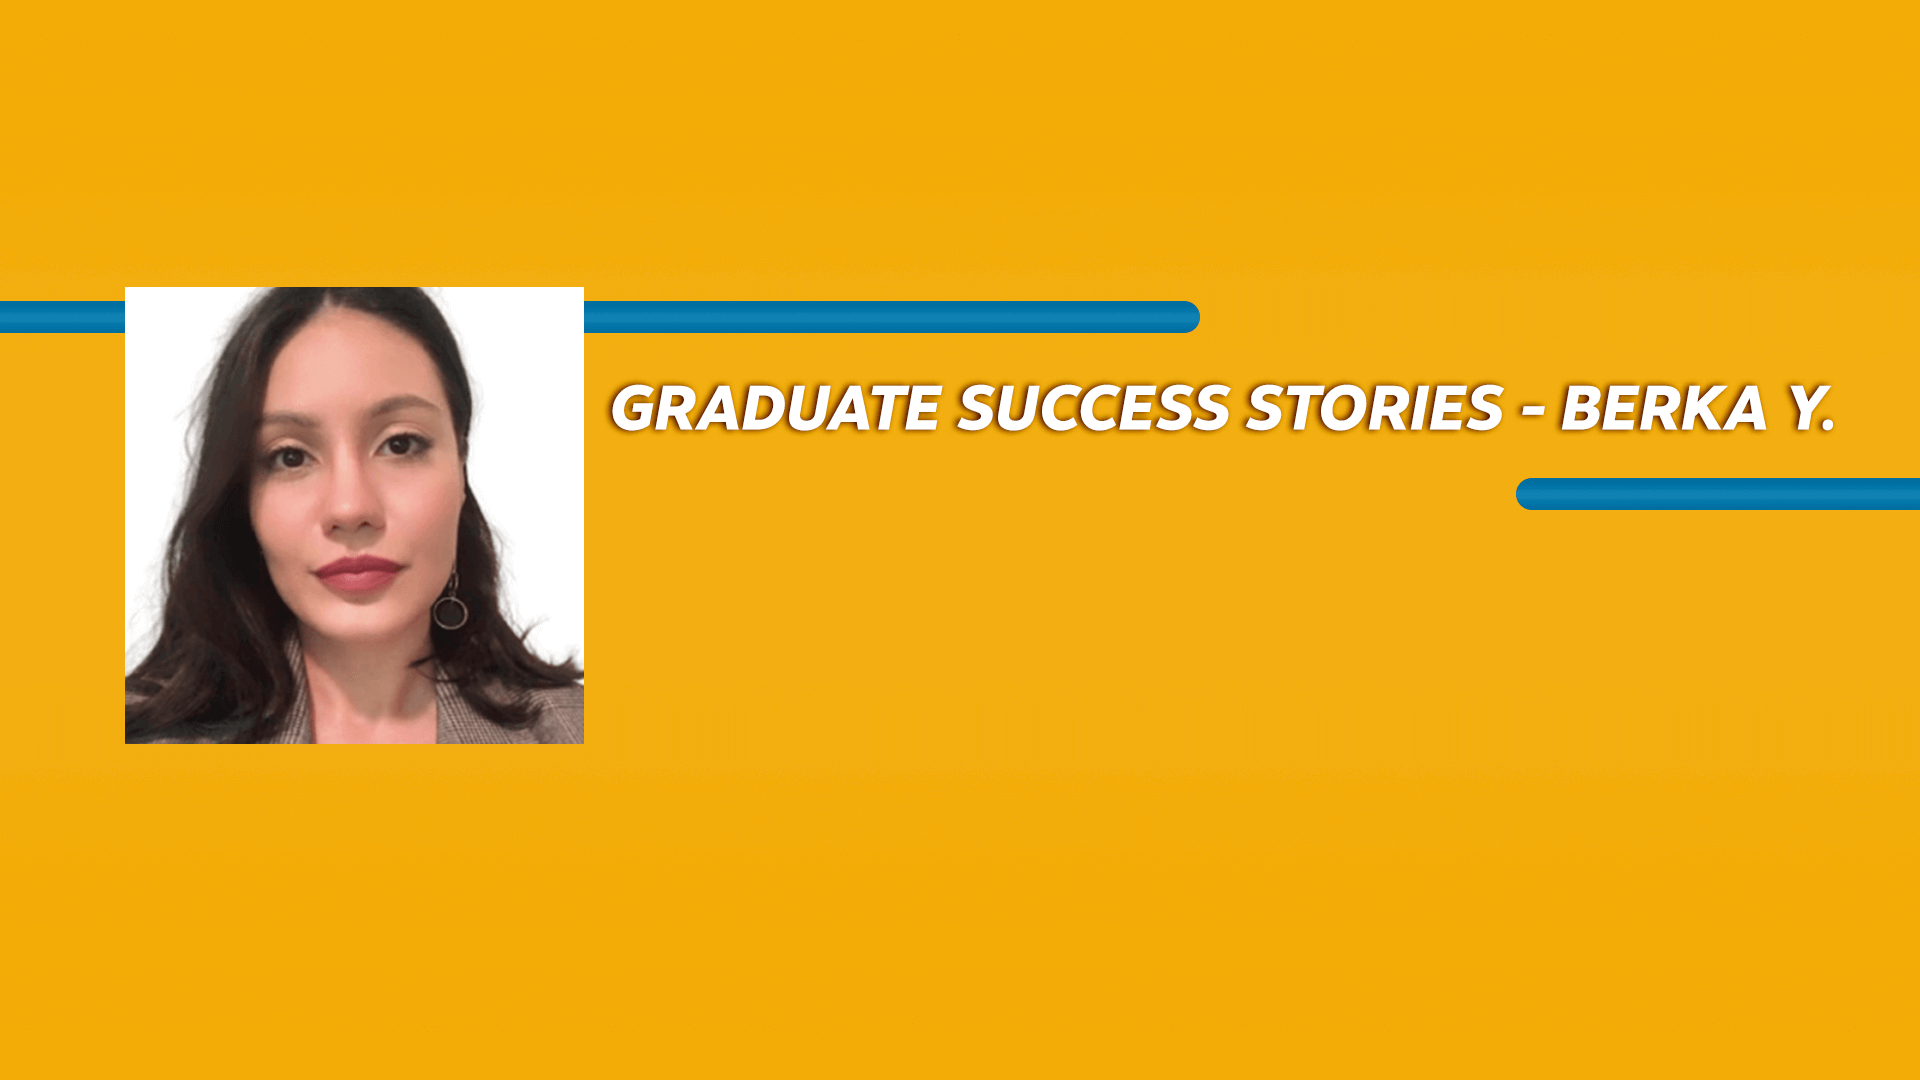 Orange rectangle with a picture of a woman and Graduate Success Stories - Berka Y. text in white font